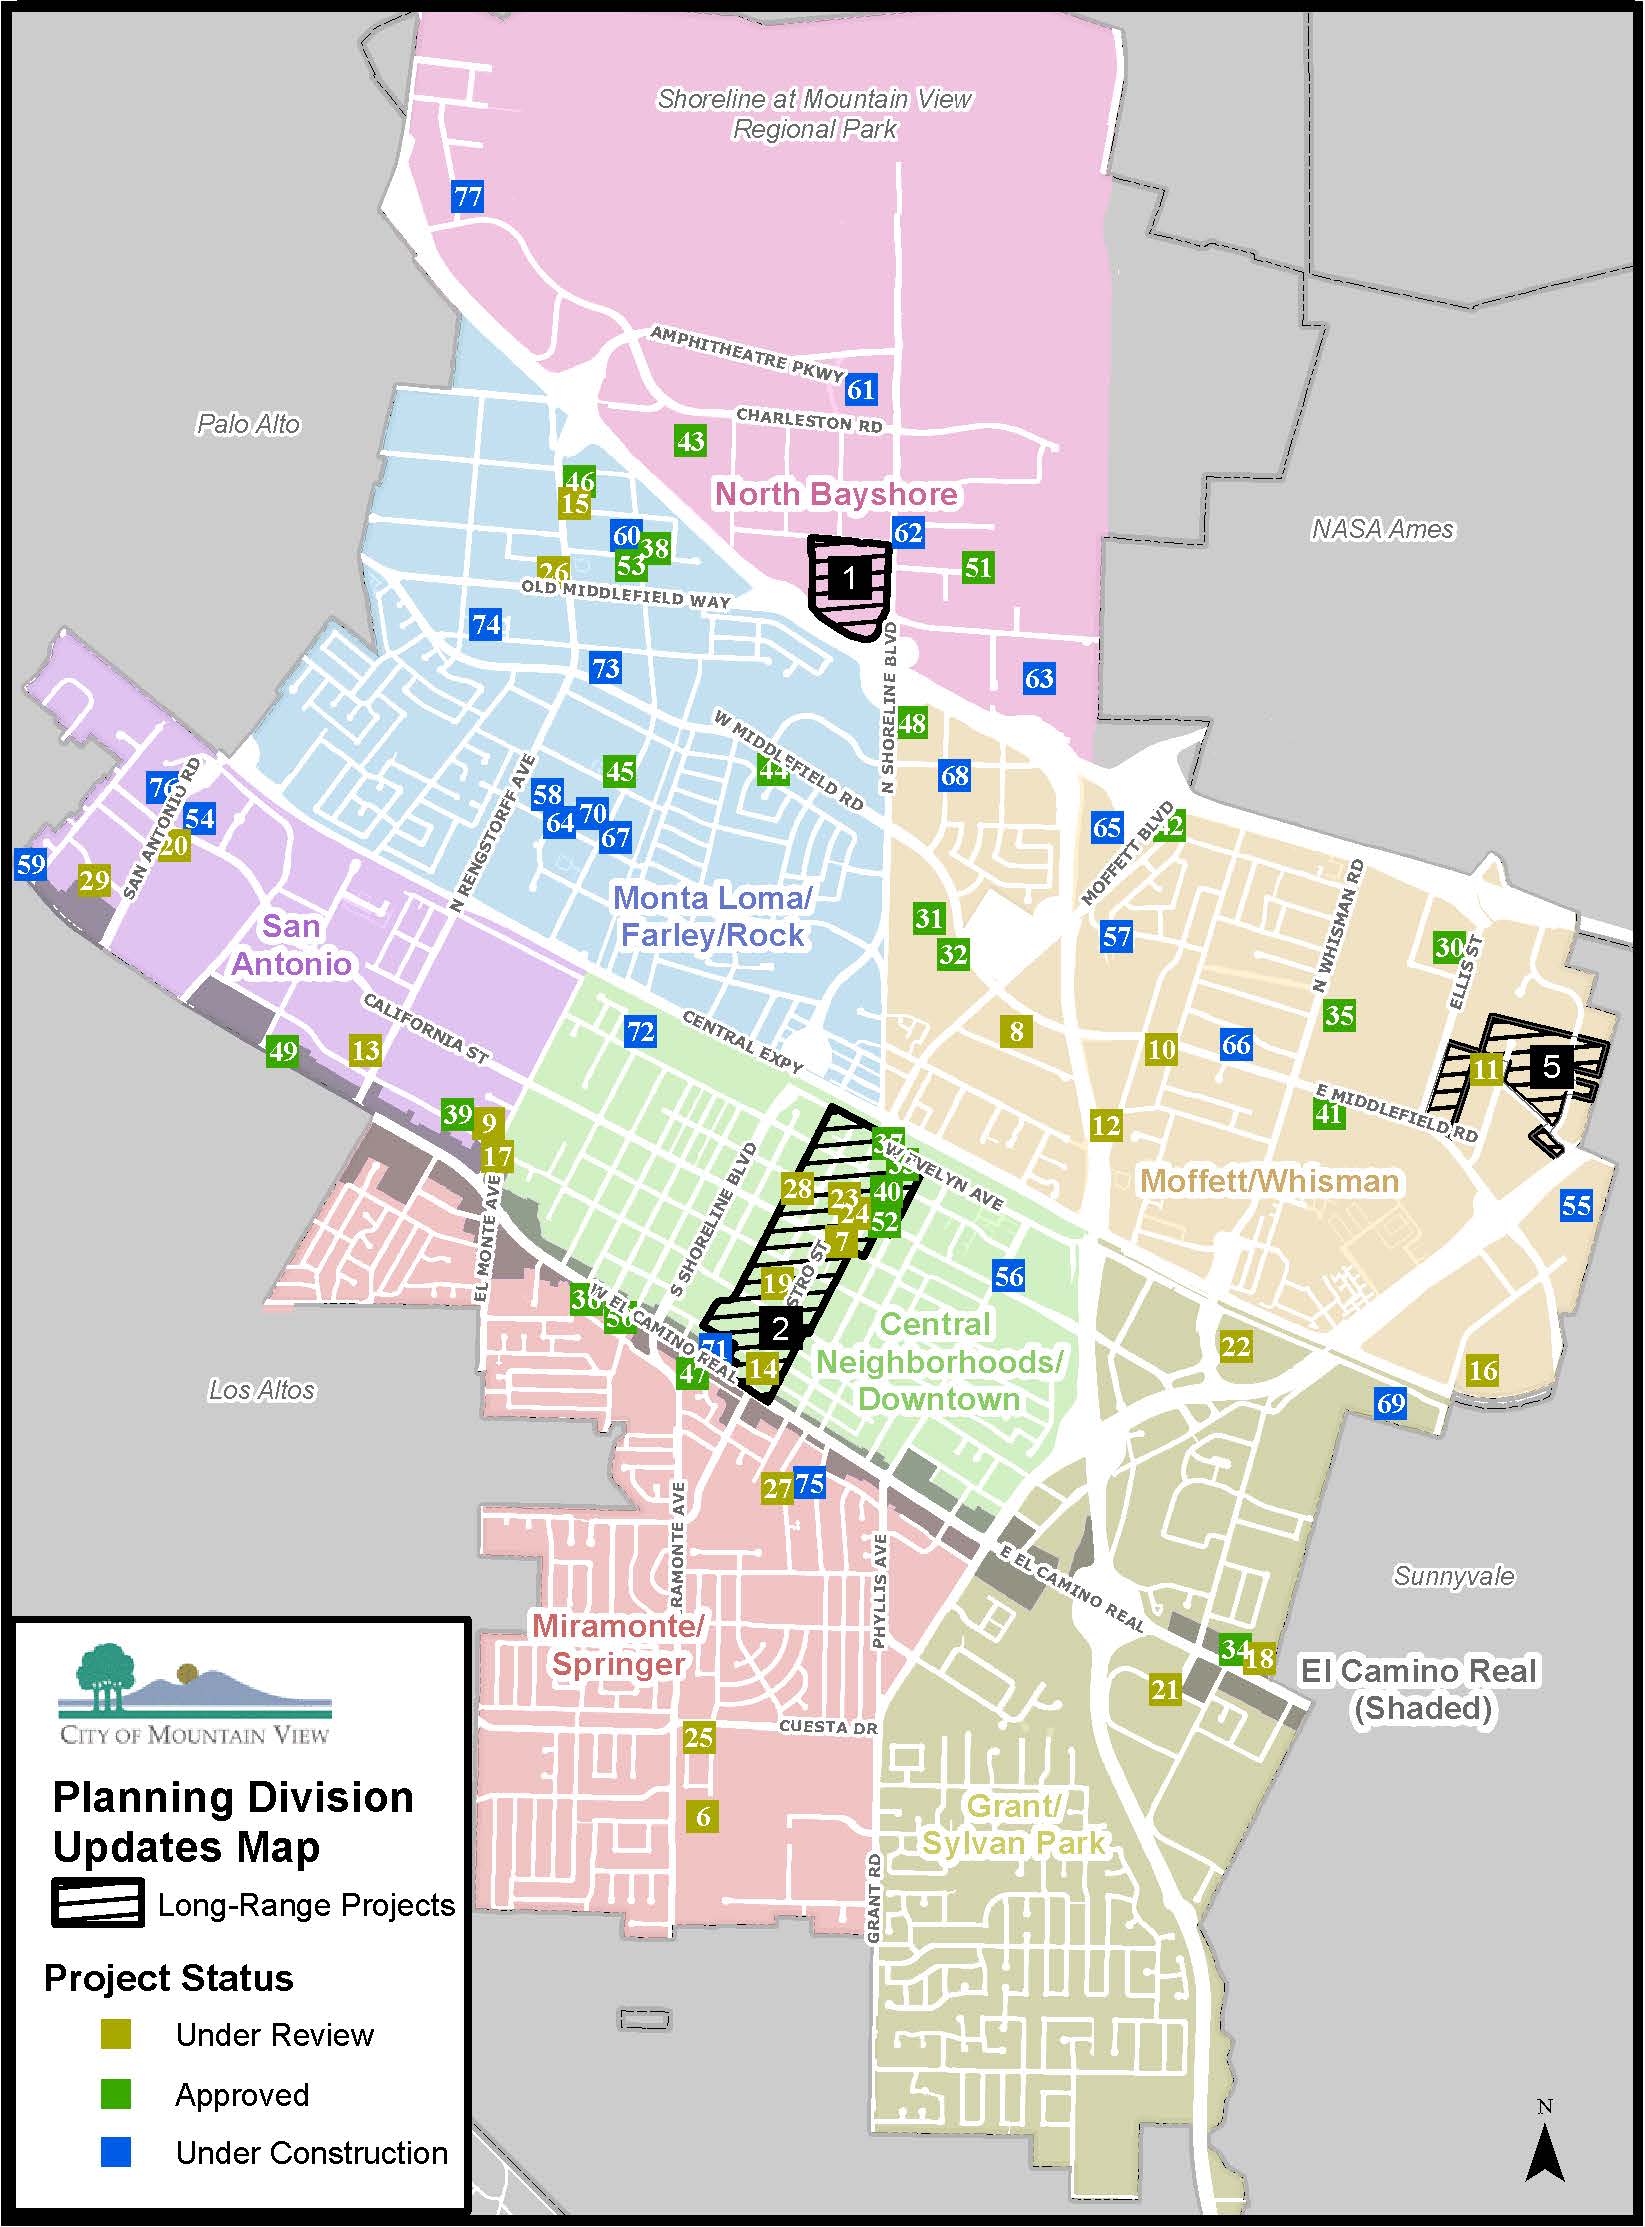 Planning Division Update Map